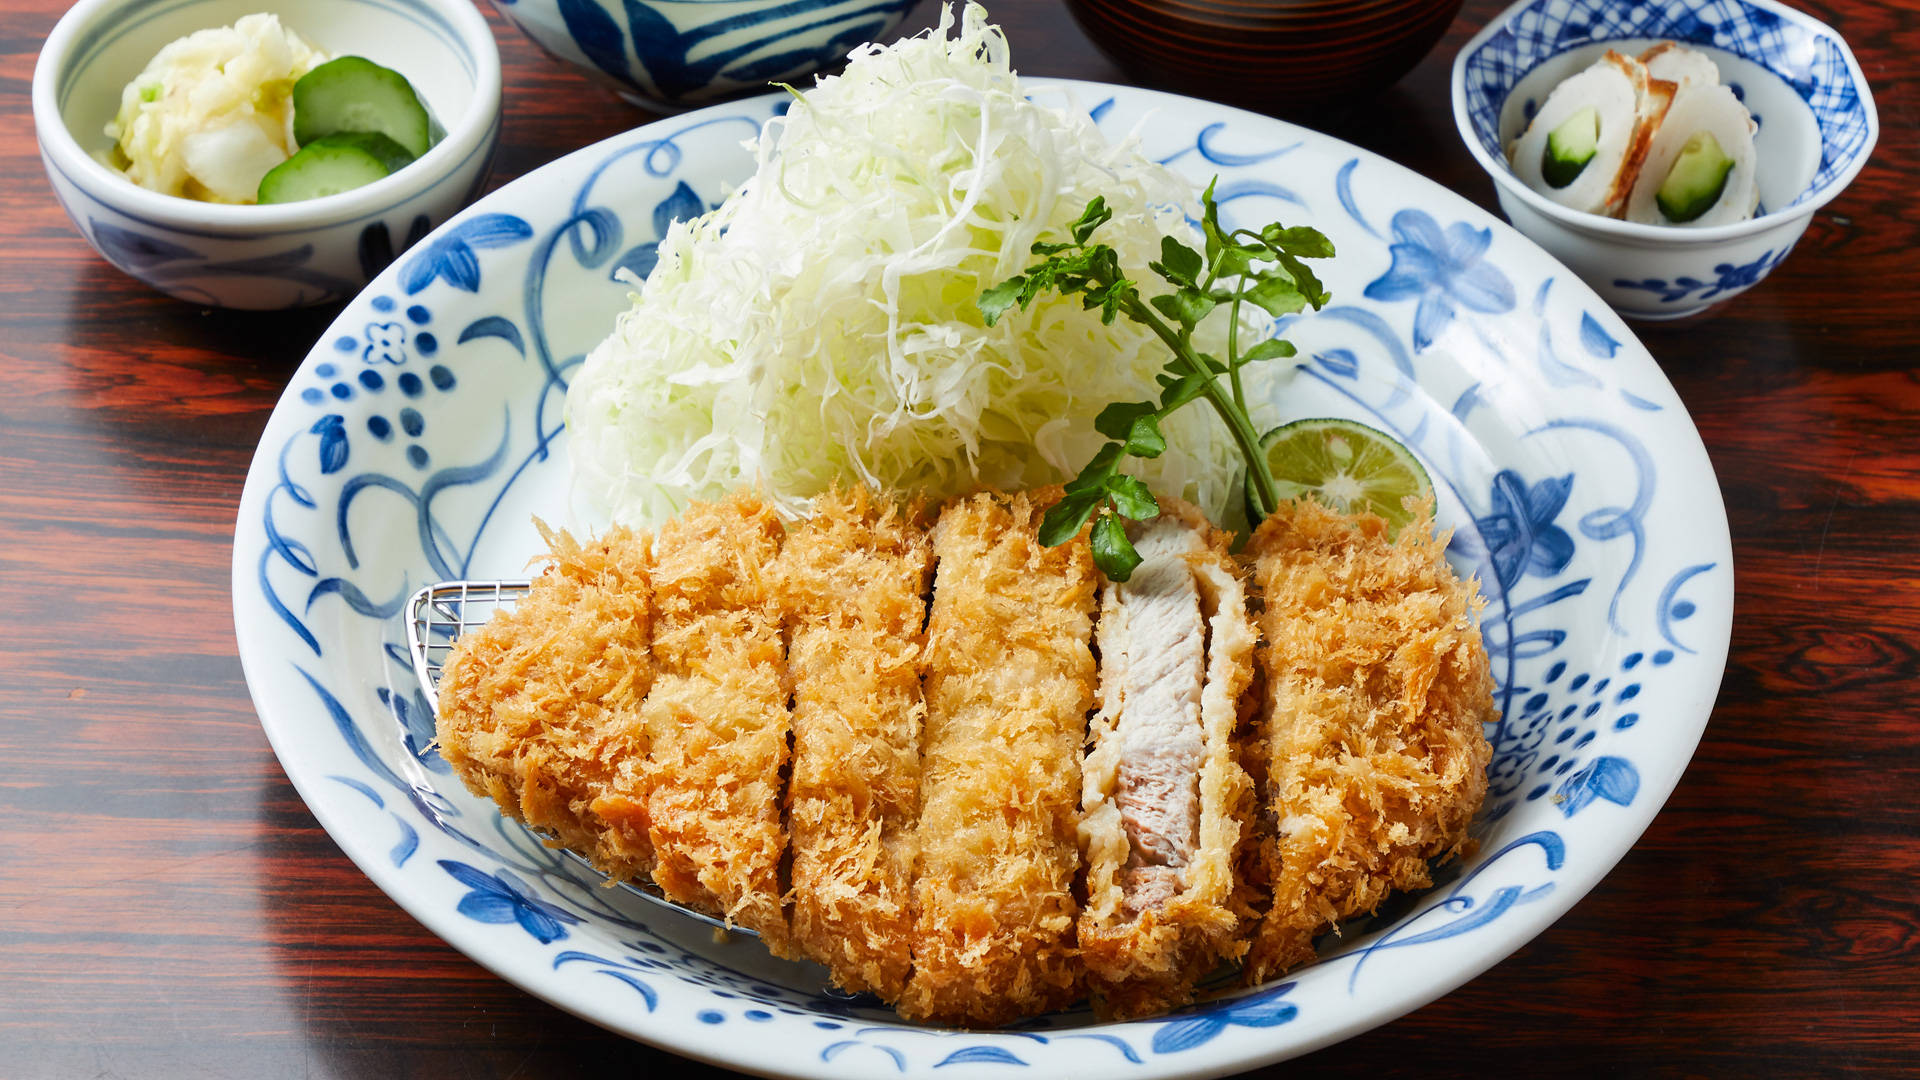 Caption: Japanese Culinary Delight ‐ Authentic Tonkatsu Meal Wallpaper